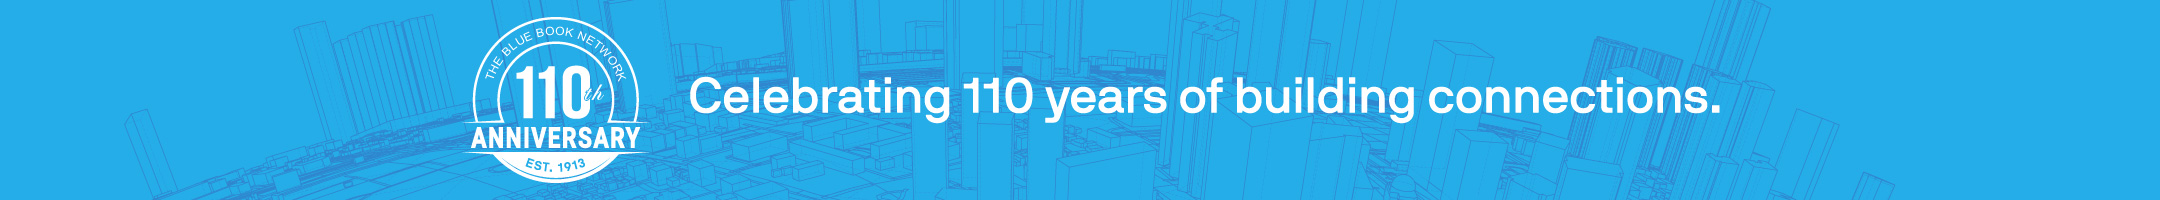 Celebrating 110 years of building connections.